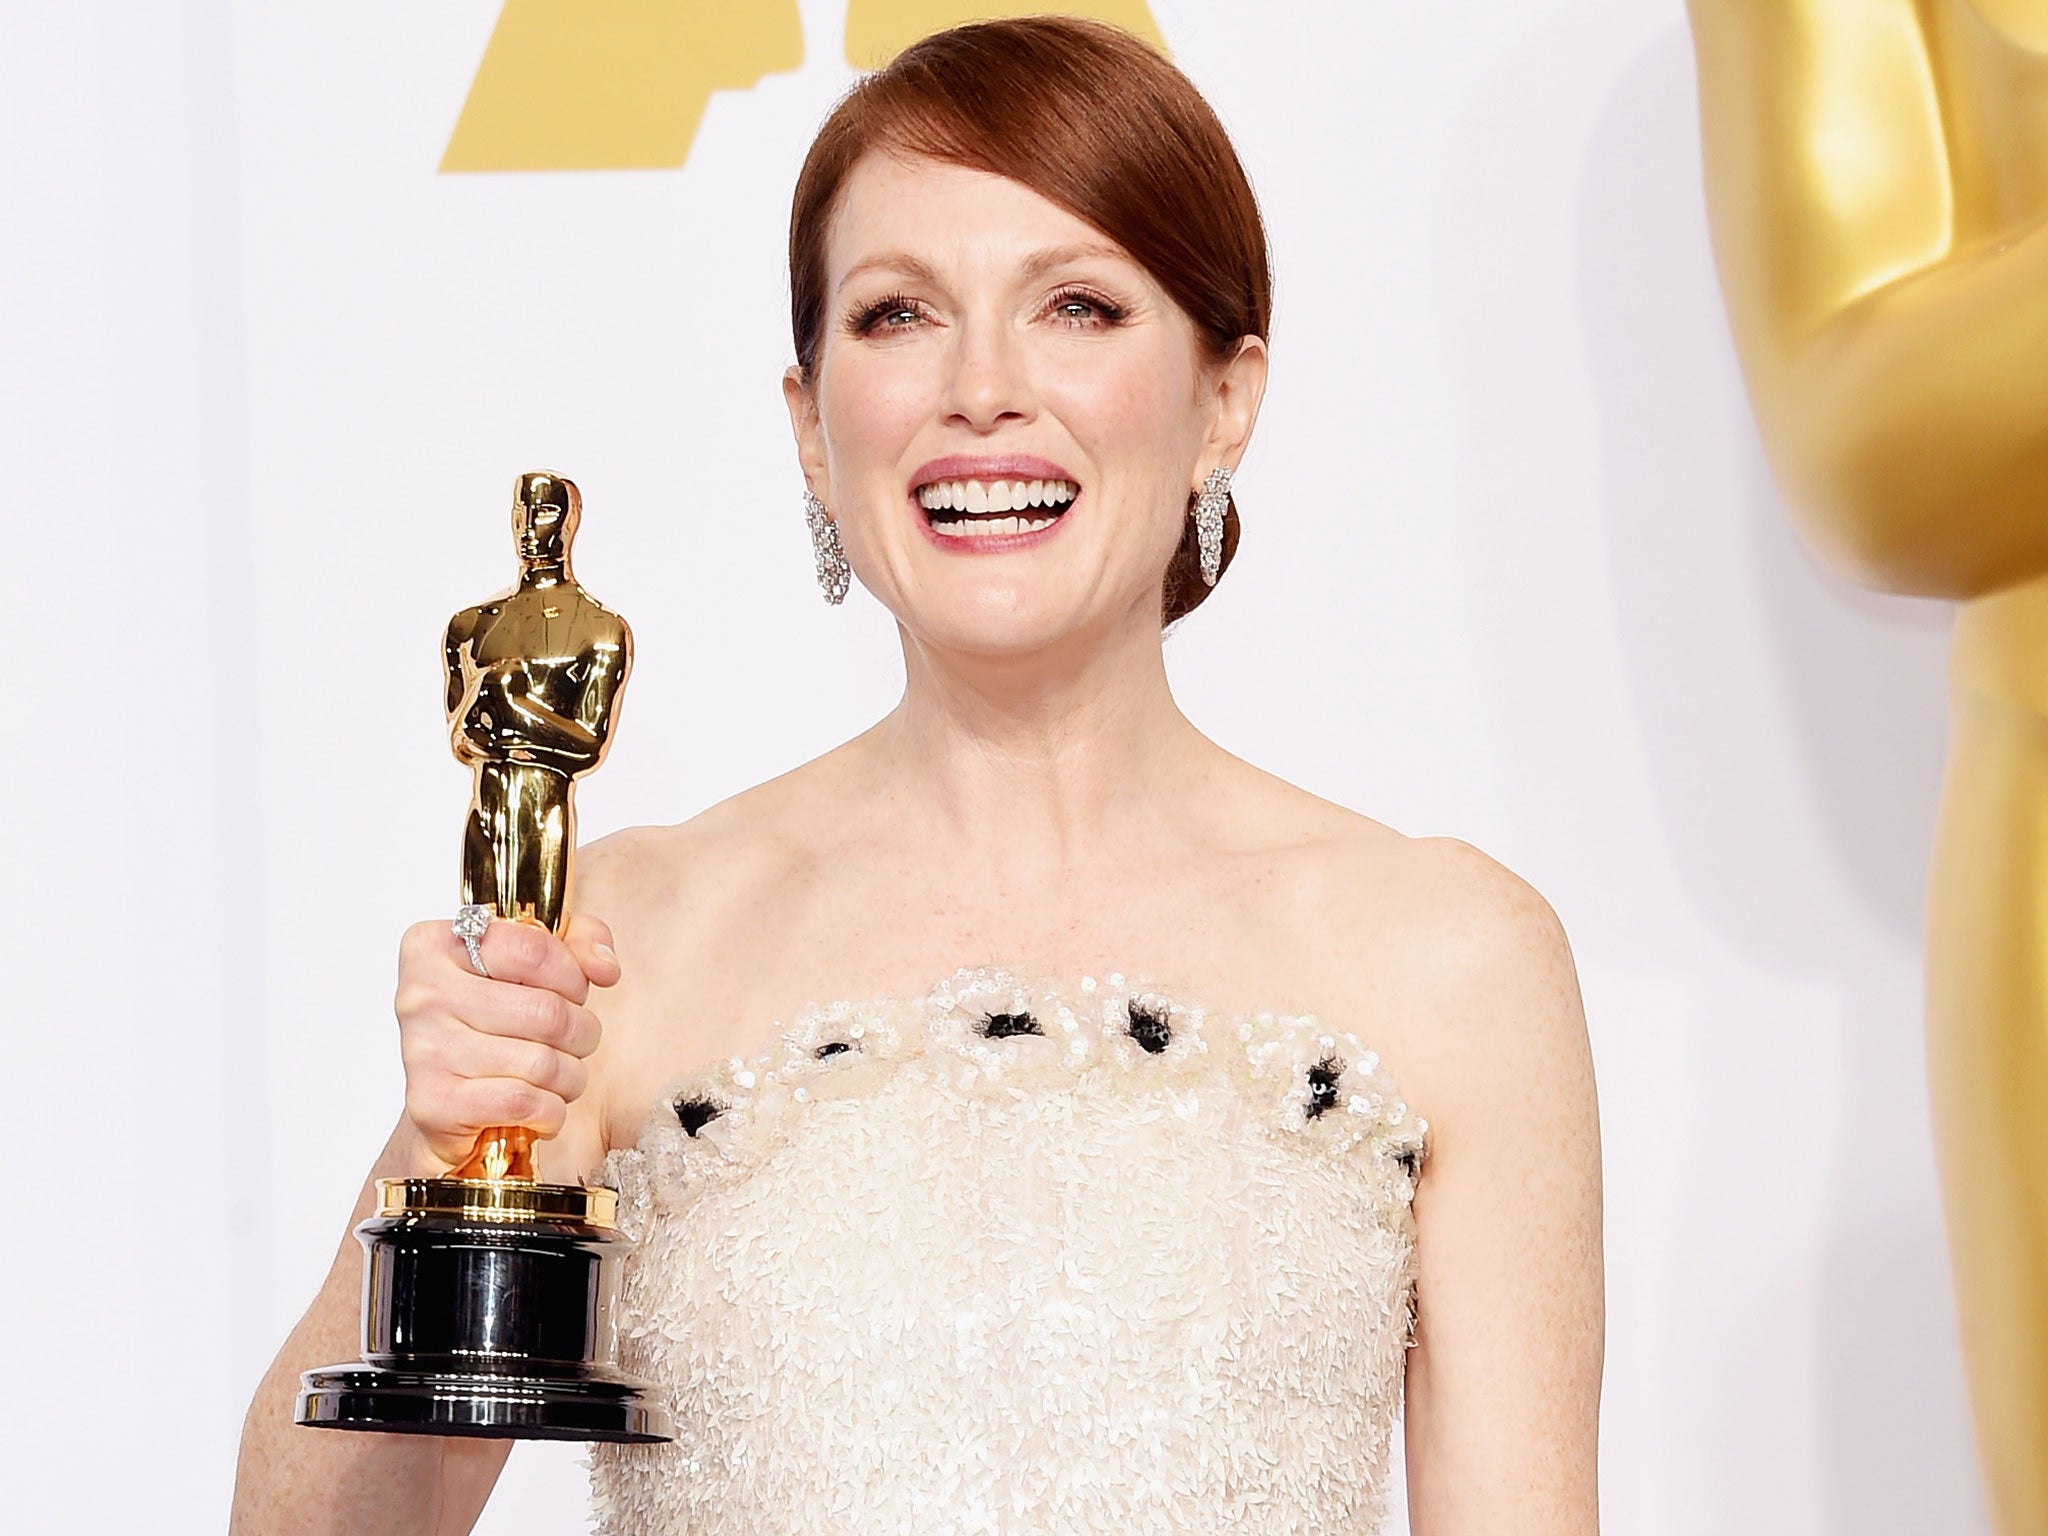 Actress Julianne Moore wins the Best Actress in a Leading Role Award for 'Still Alice' during the 87th Annual Academy Awards in Hollywood, California